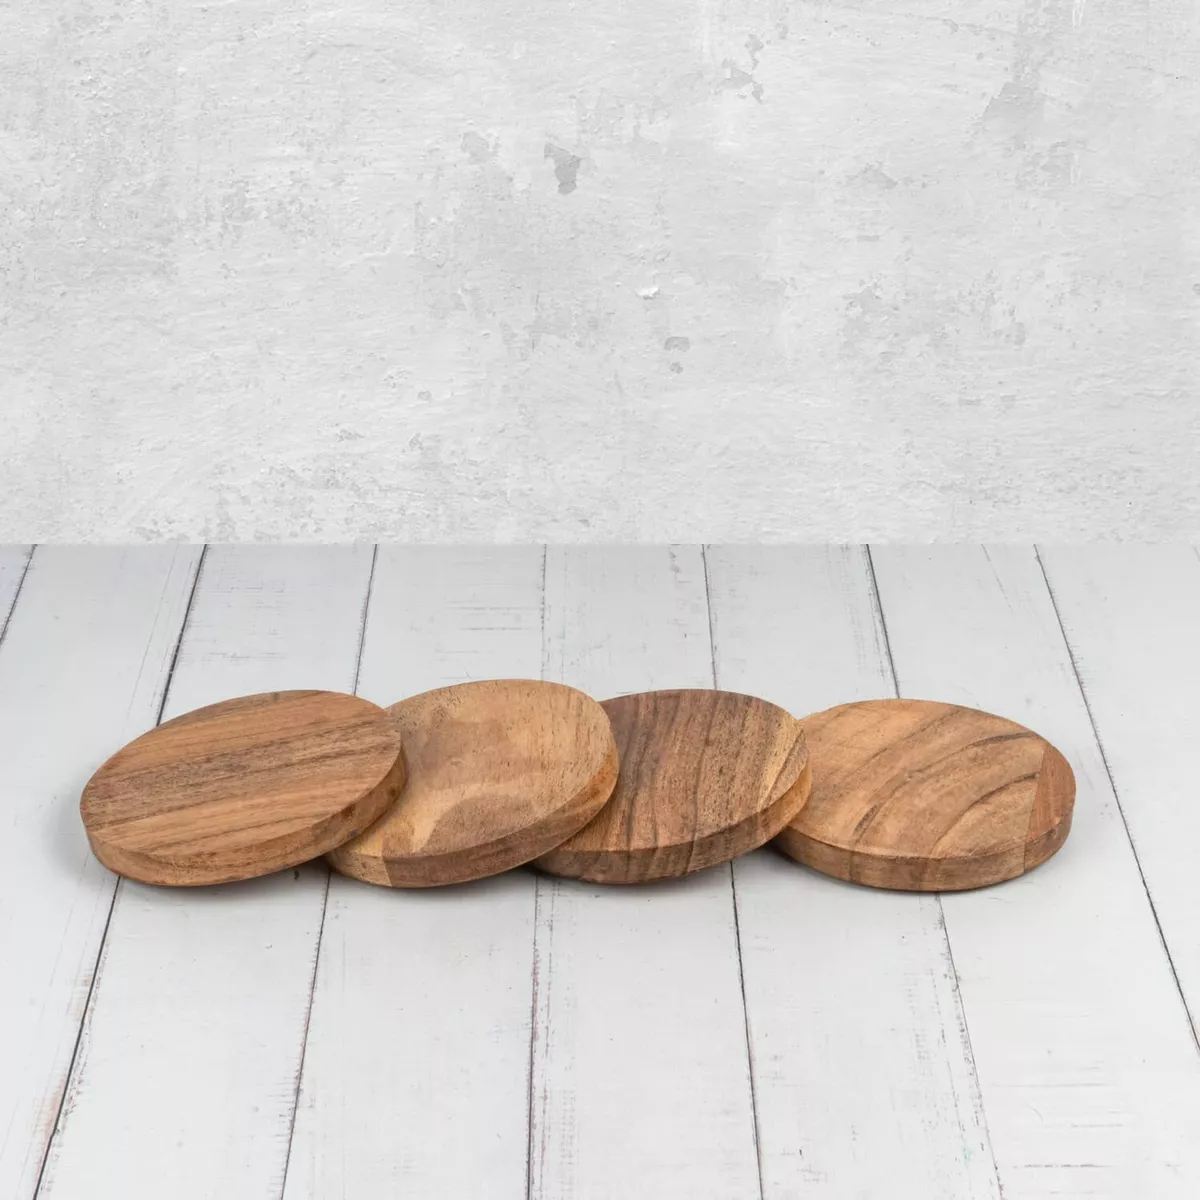 Wooden Coasters for Drinks - Natural Acacia Wood Drink Coaster Set